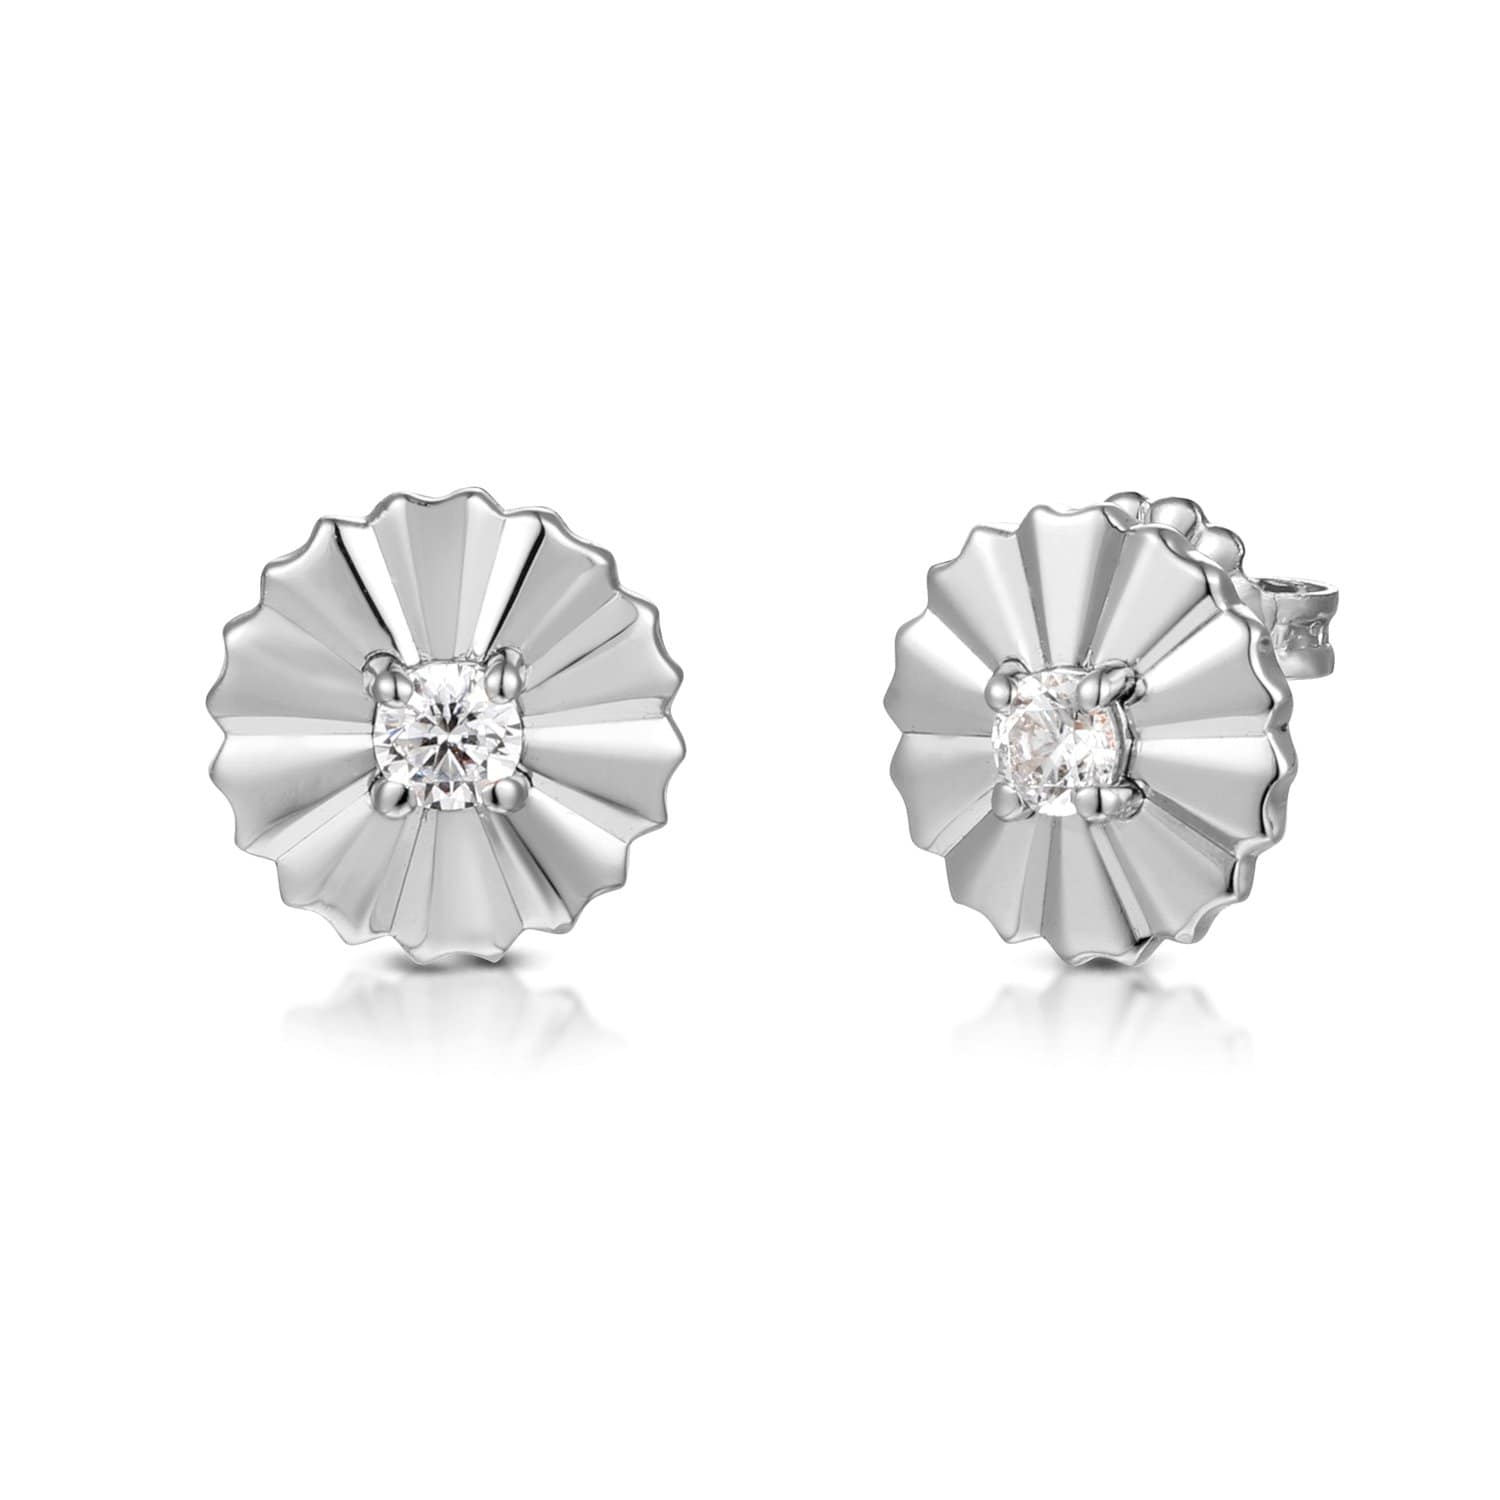 LynoraJewellery ASTRO STUDS STERLING SILVER